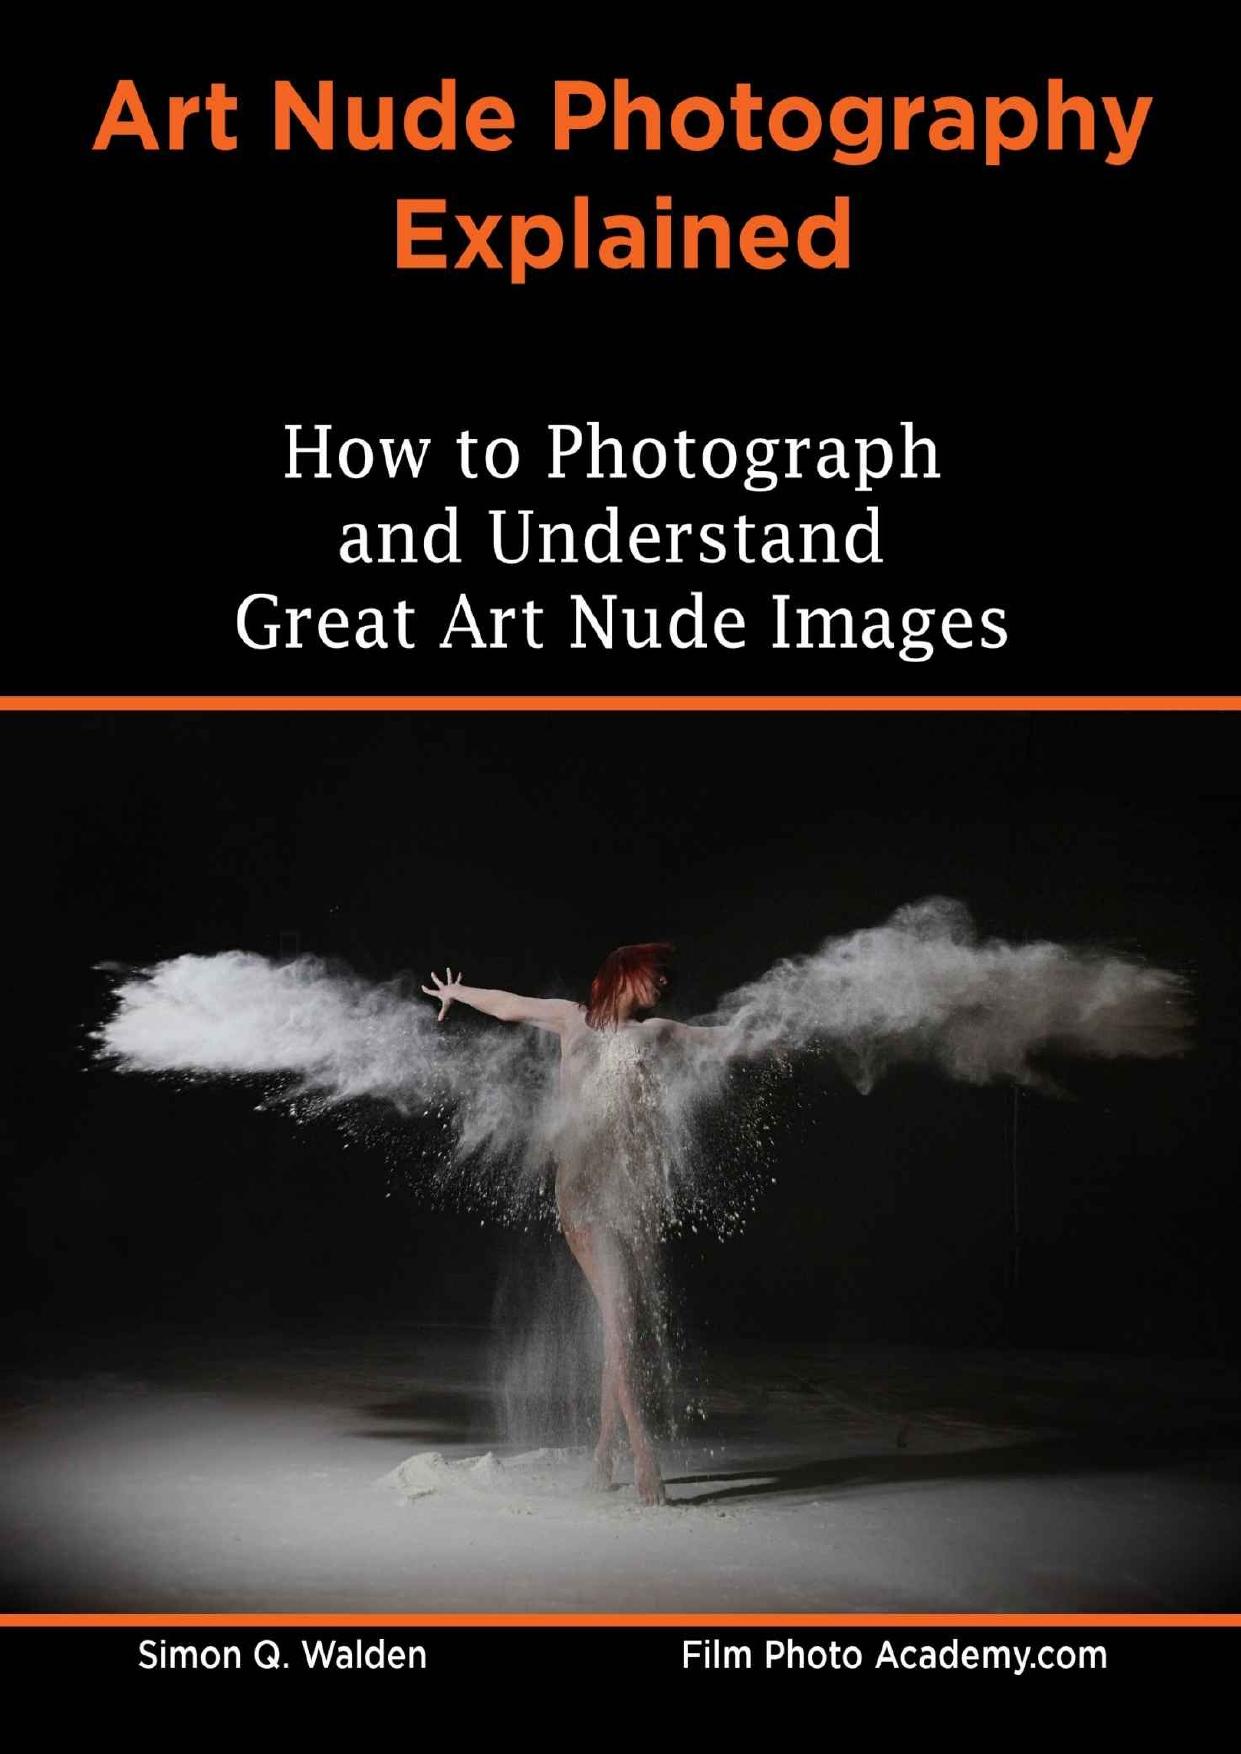 Art Nude Photography Explained: How to Photograph and Understand Great Art Nude Images by Simon Walden